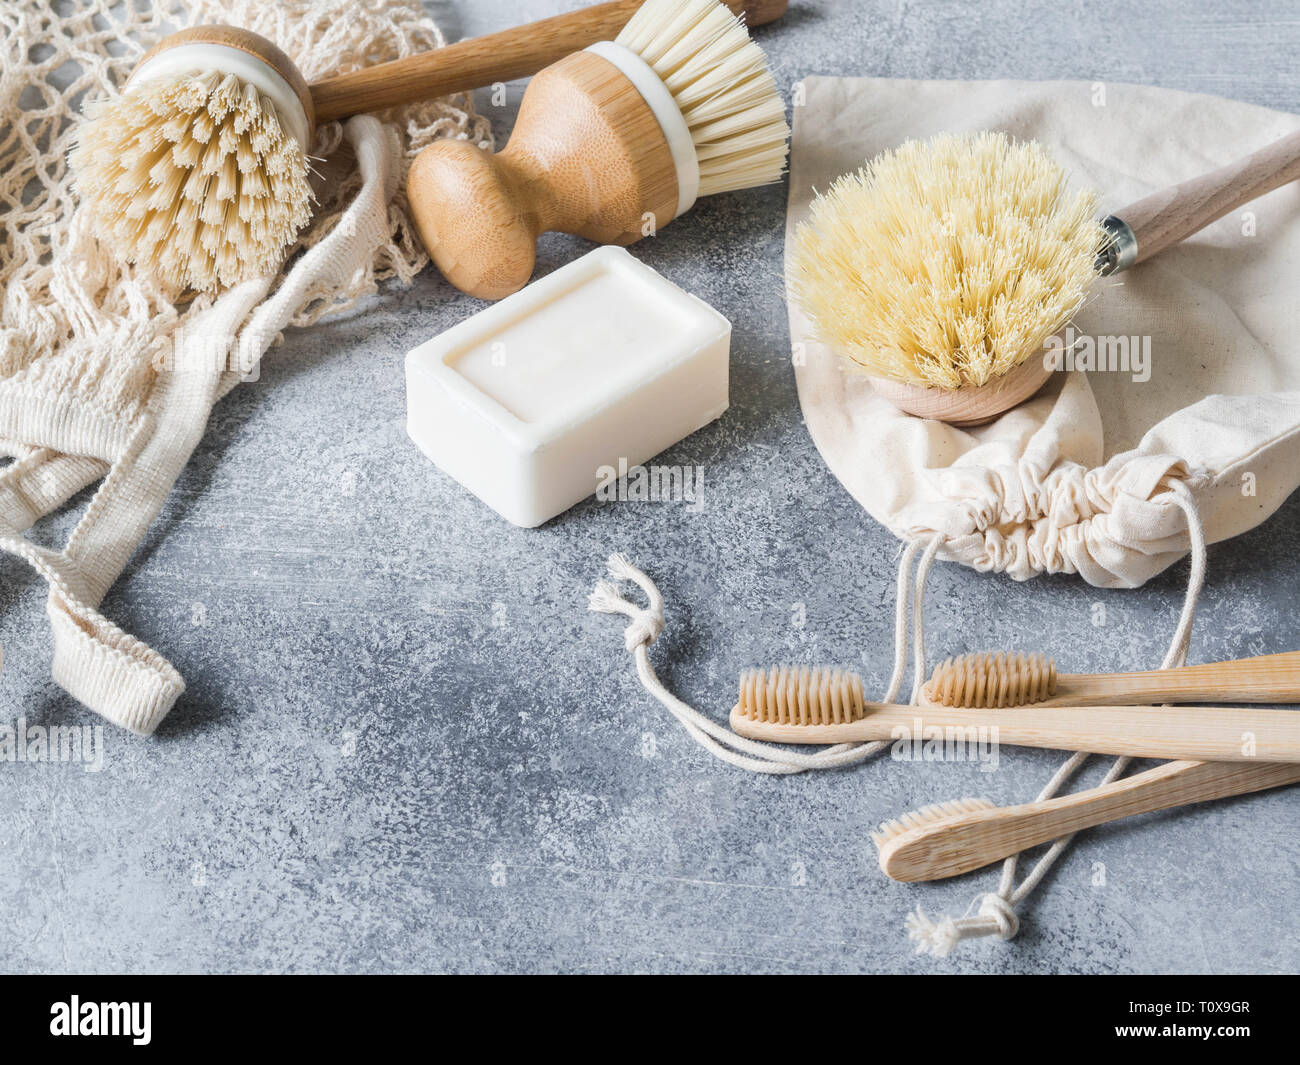 Dish washing brushes, bamboo toothbrushes, reusable bags. Sustainable lifestyle zero waste concept. Clean without waste. No plastic objects. Copy spac Stock Photo